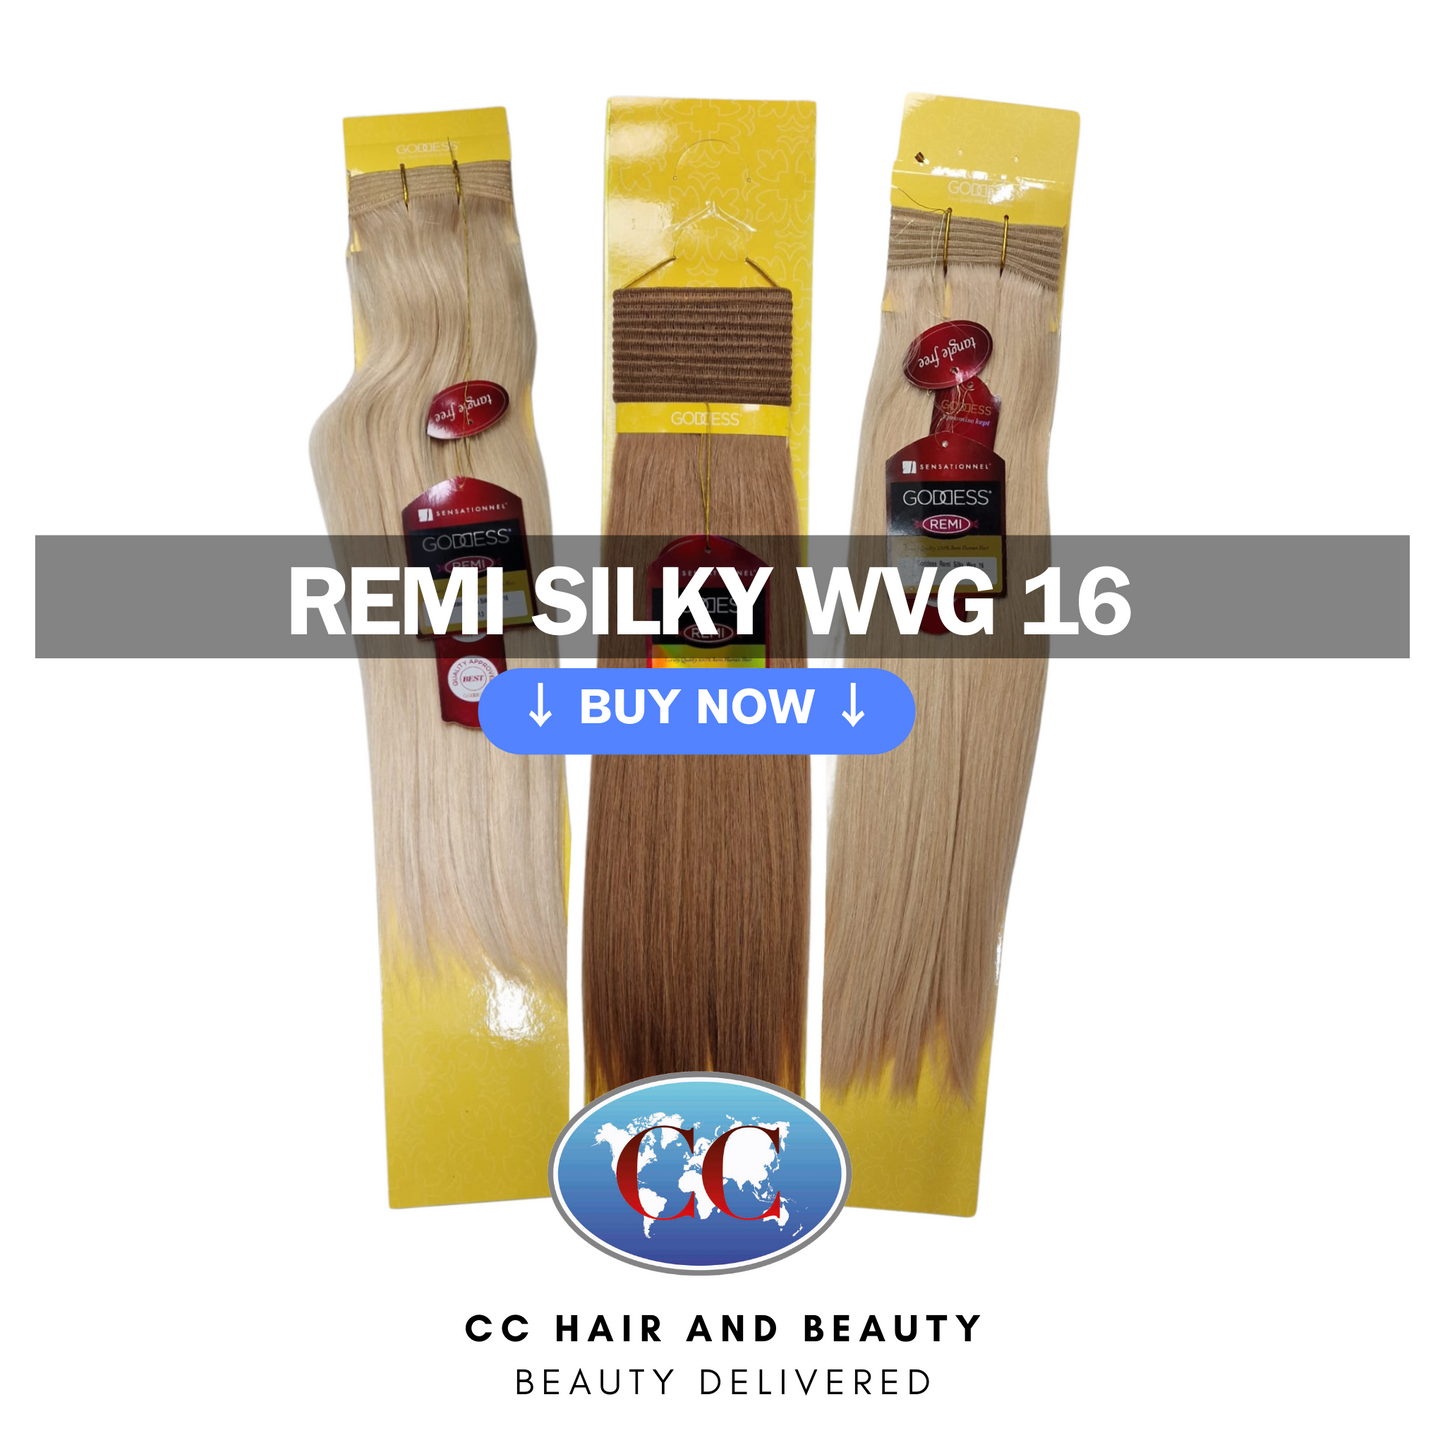 Remi Goddess Silky Hair Extensions - this one